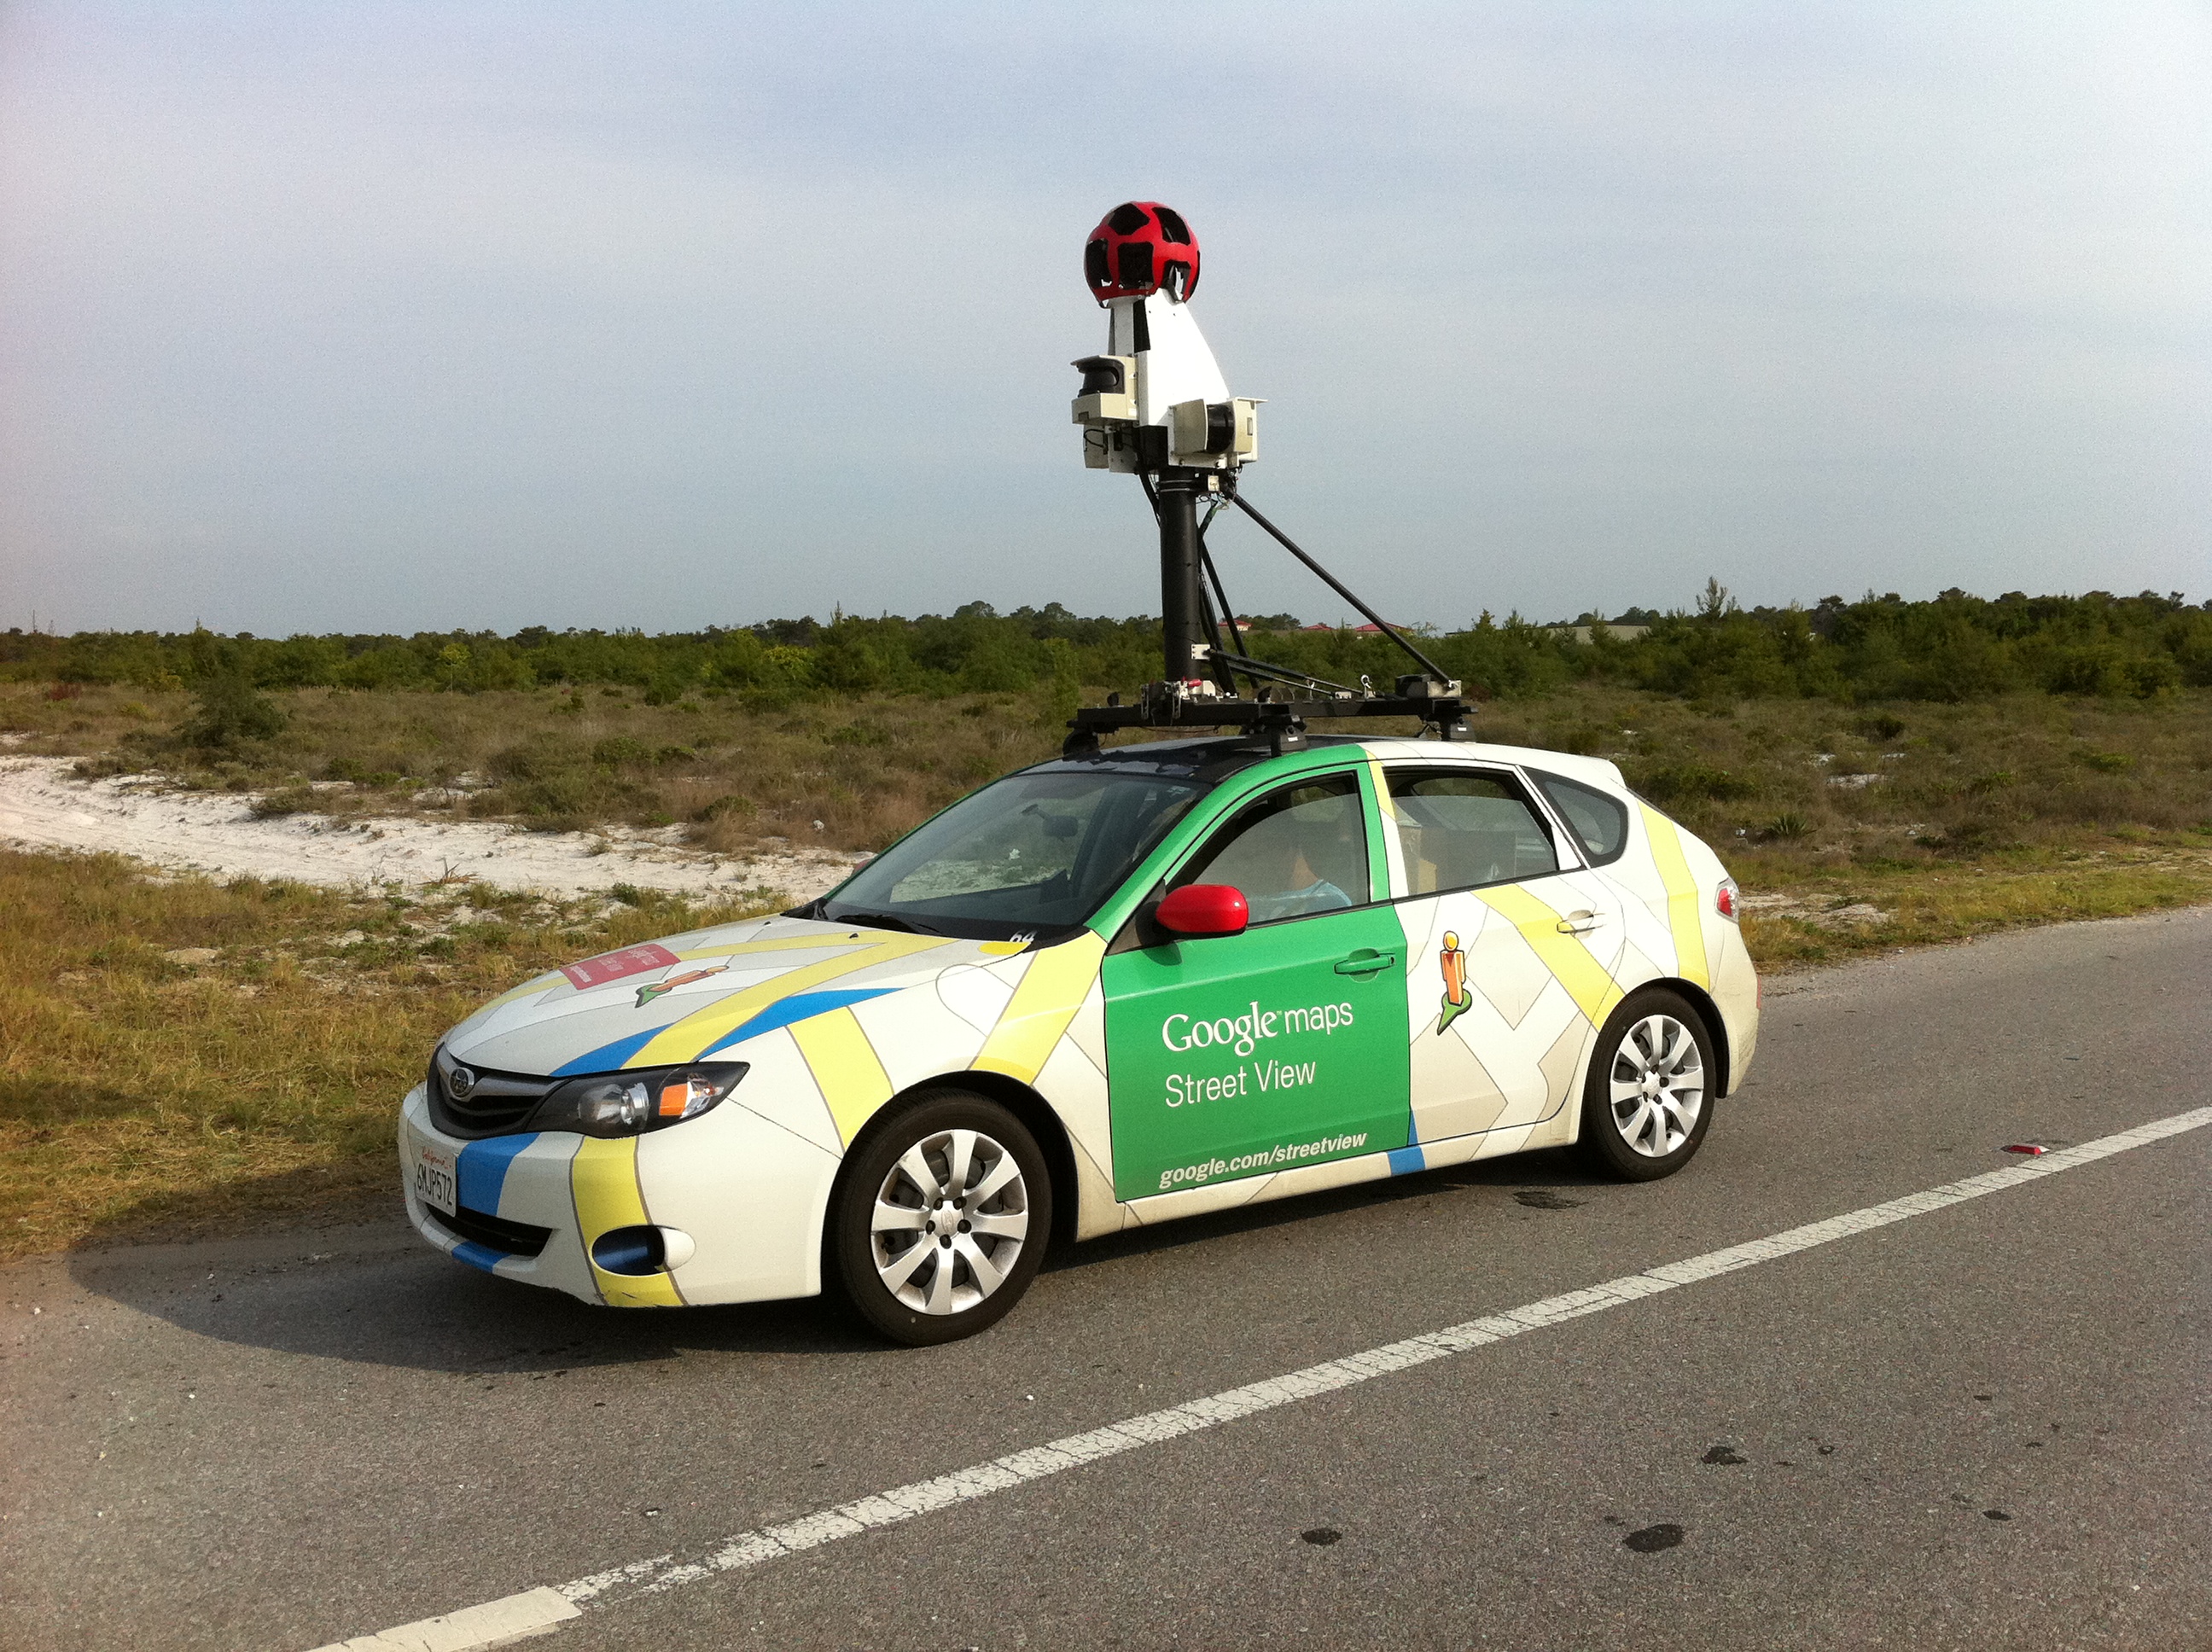 One of the vehicles used to record the images for Google Street View